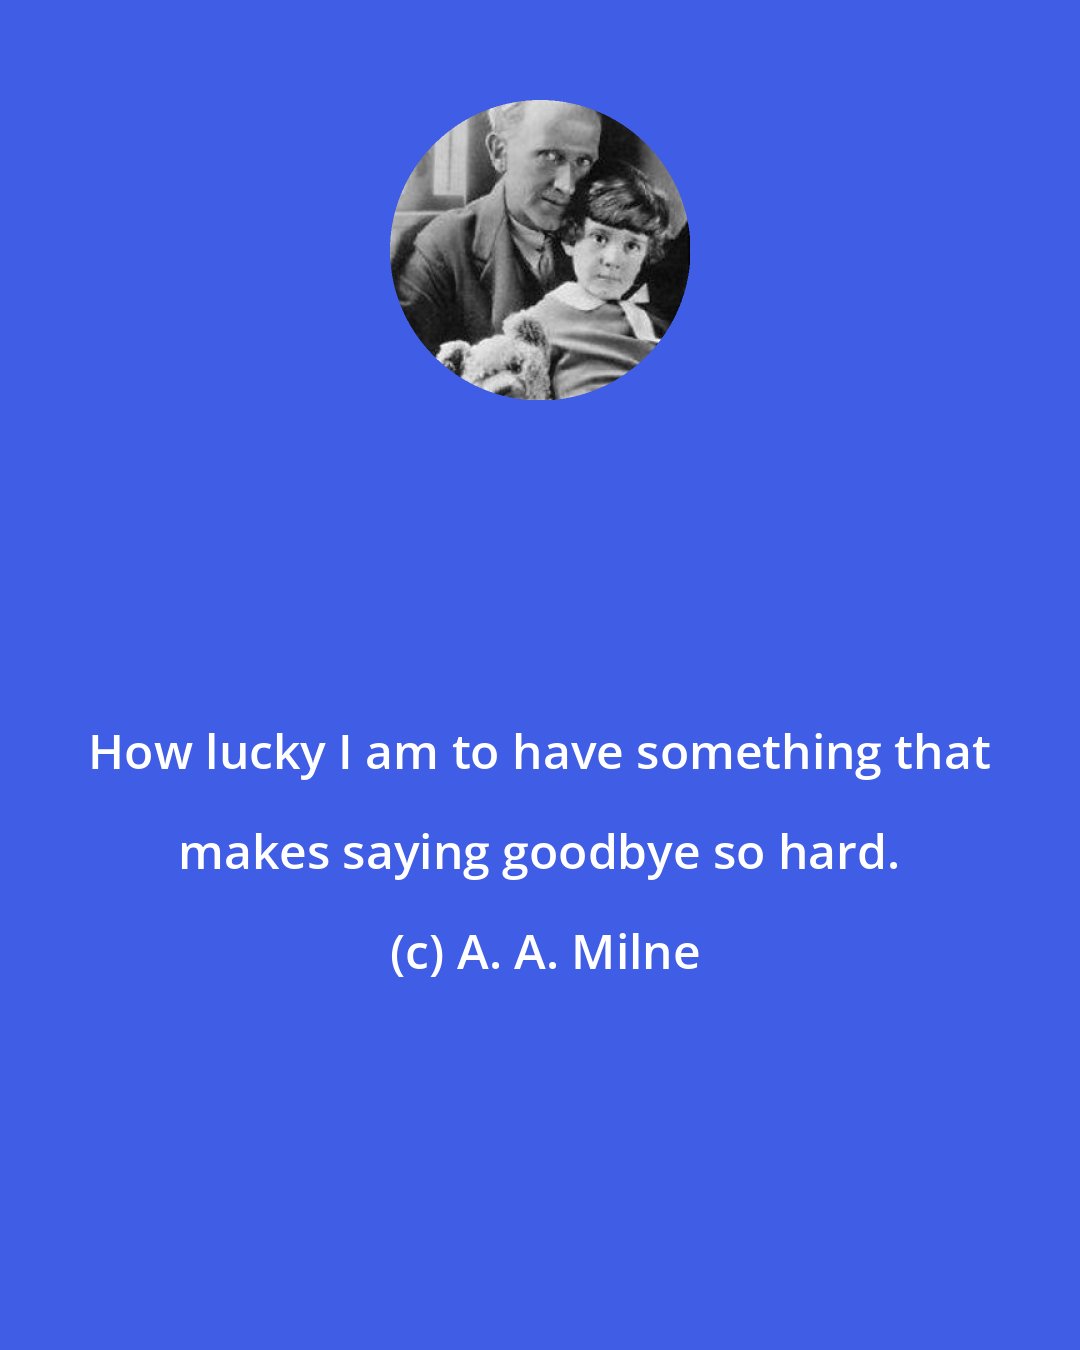 A. A. Milne: How lucky I am to have something that makes saying goodbye so hard.